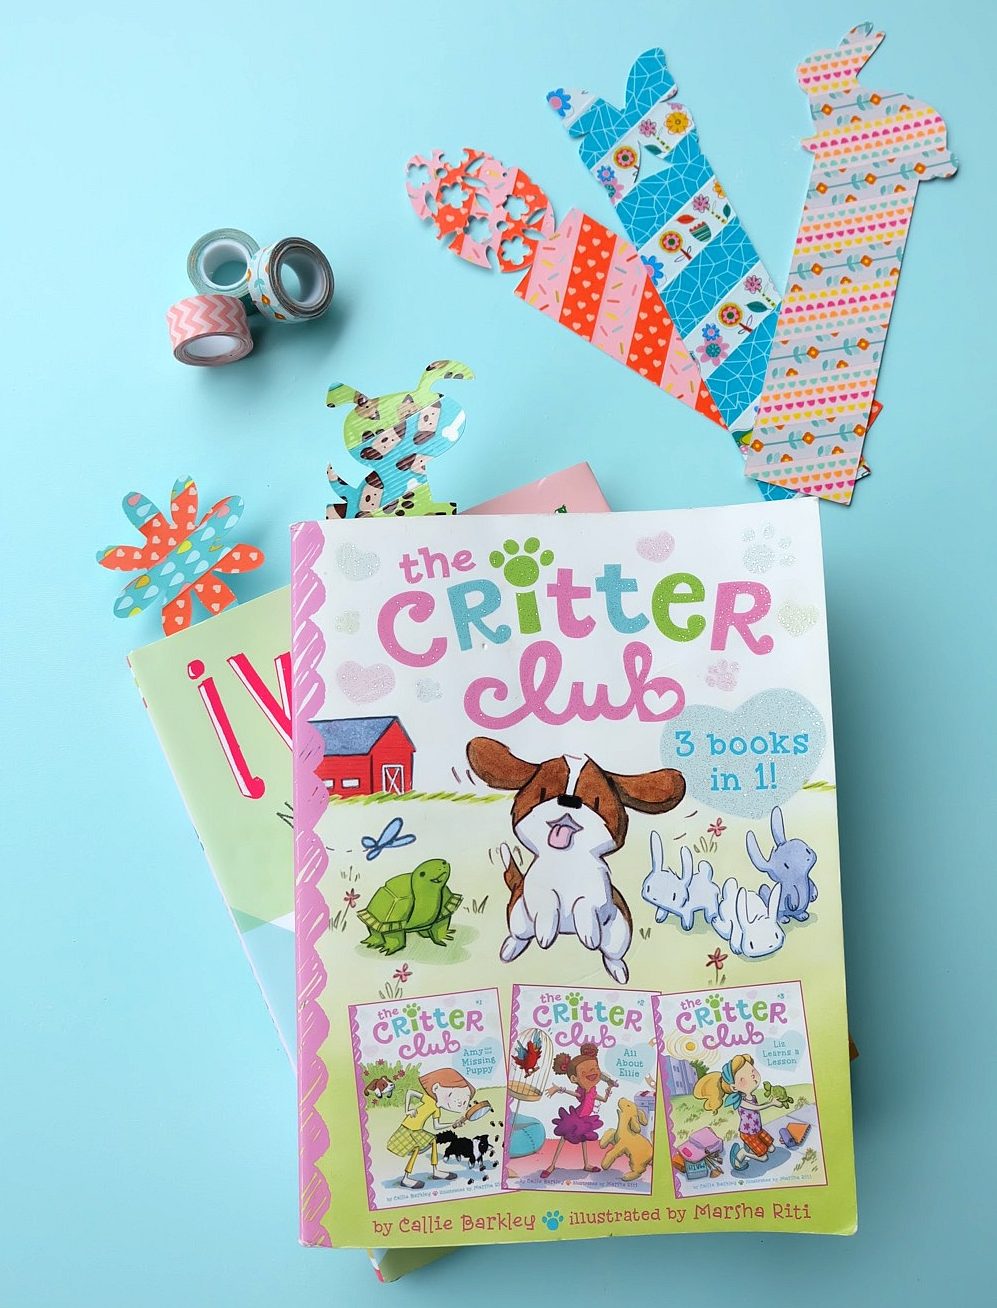 These DIY Animal Shaped Washi Tape Bookmarks made on the Cricut Explore are easy to make and they are a 10 minute craft project! They are so cute and would make great handmade gifts or non-candy Easter presents!